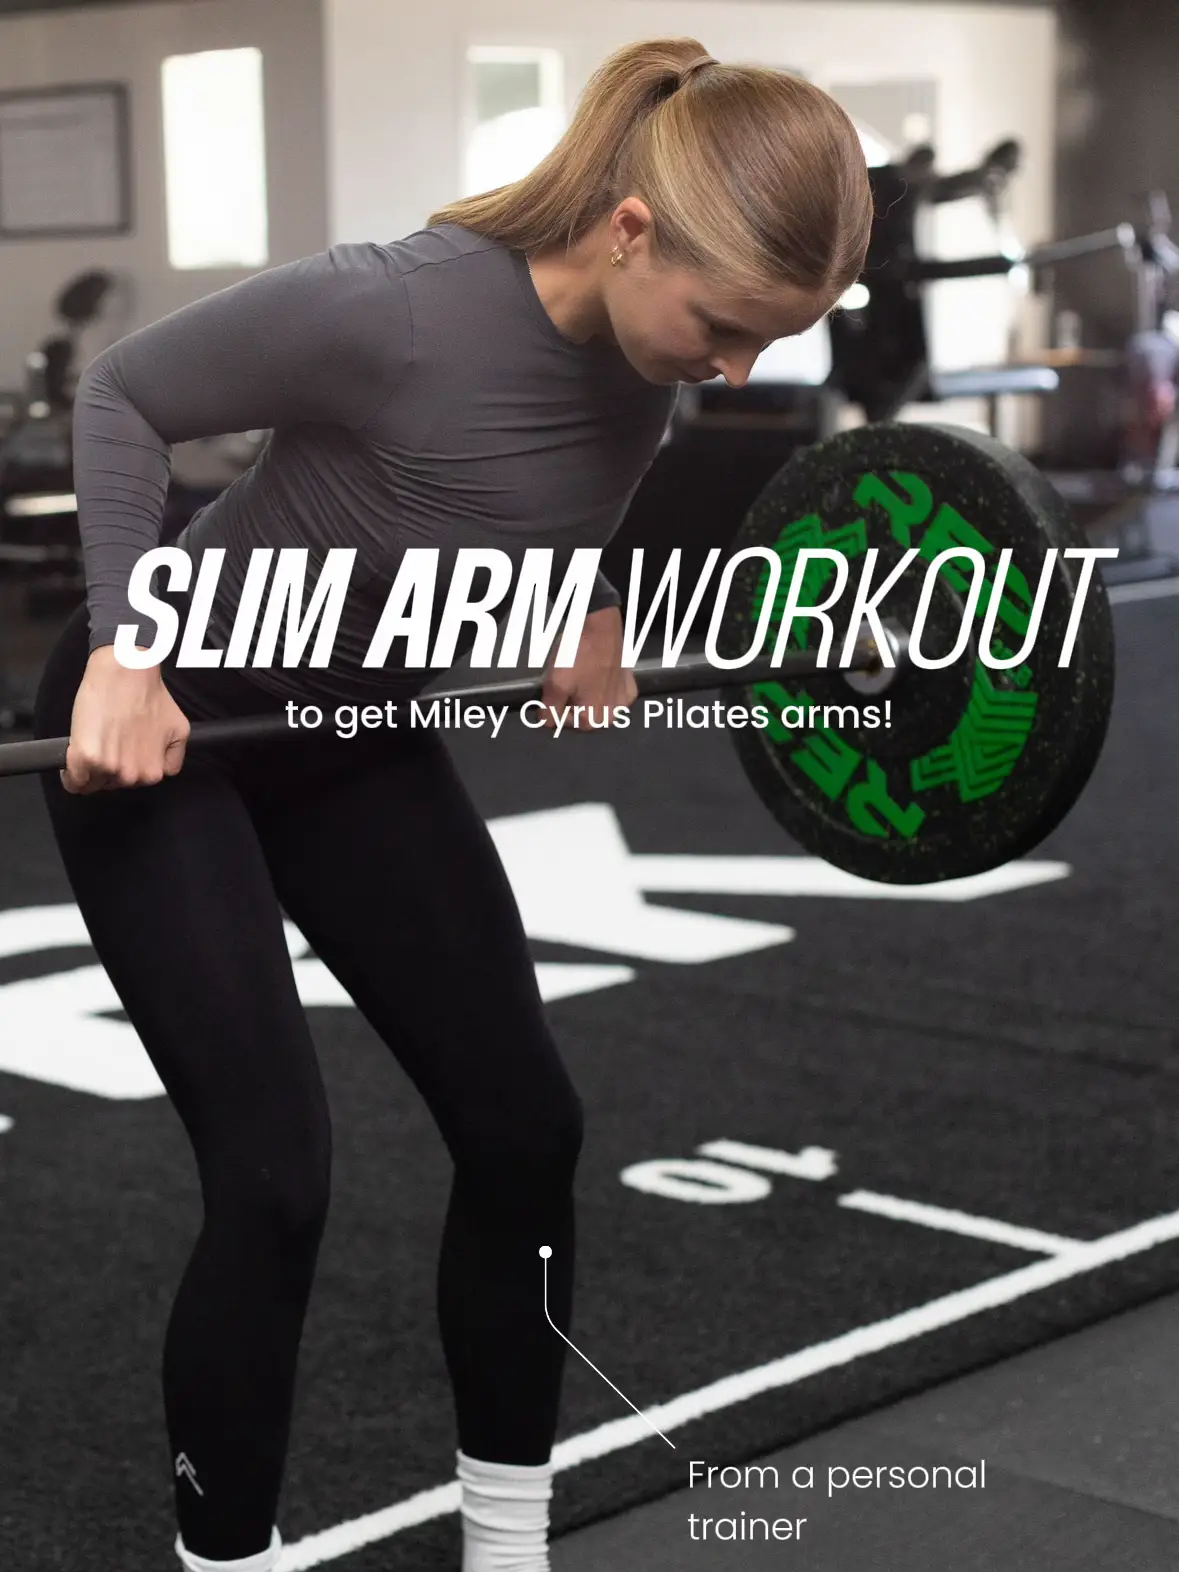 Get Miley Cyrus arms with this workout💪